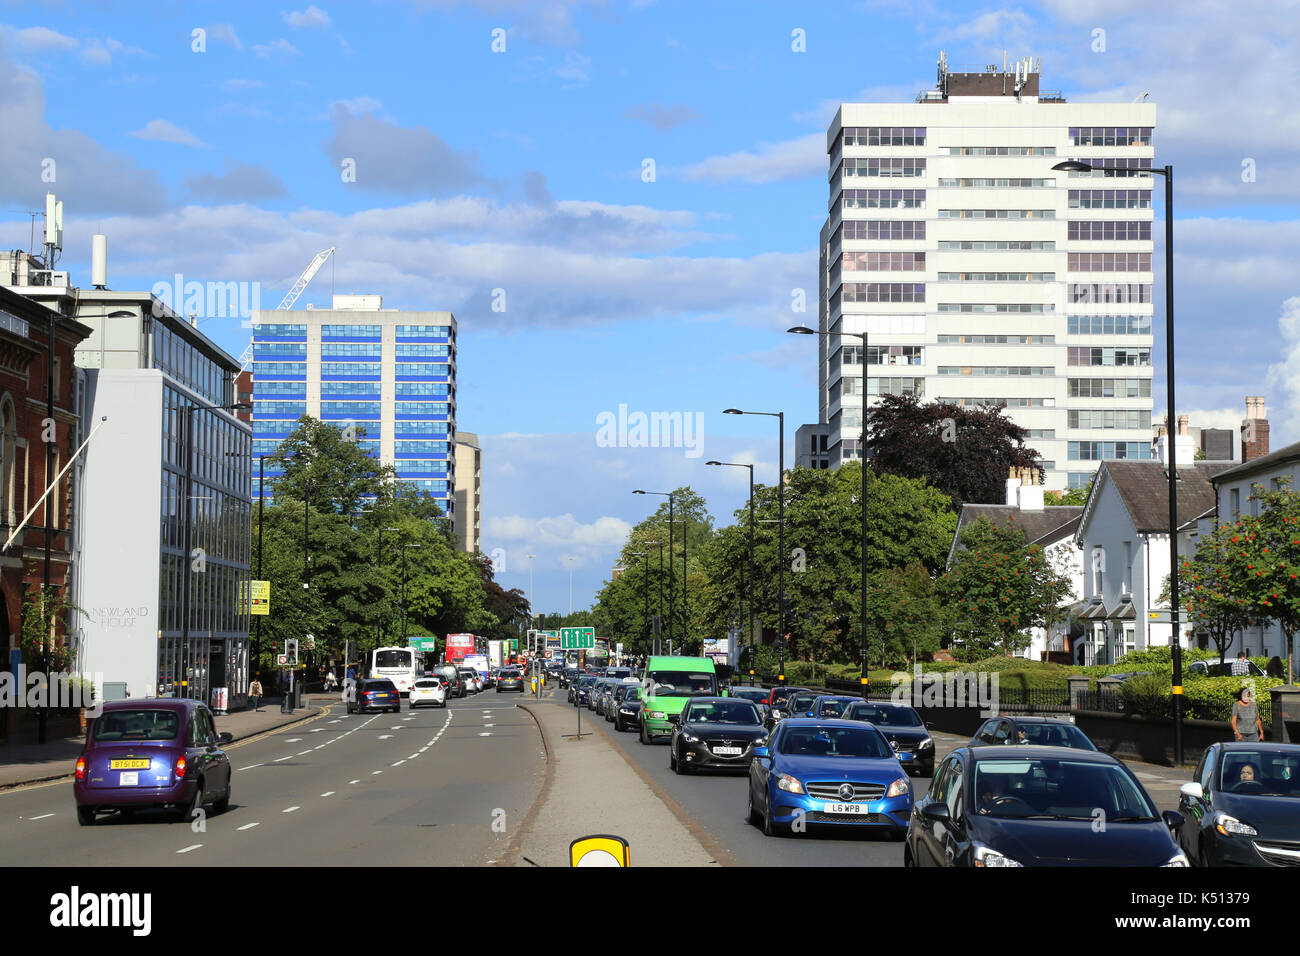 The A456 Hagley Road, Edgbaston, Birmingham, UK, looking towards the city centre.  Evening rush hour commuter traffic is heading away from Birmingham. Stock Photo